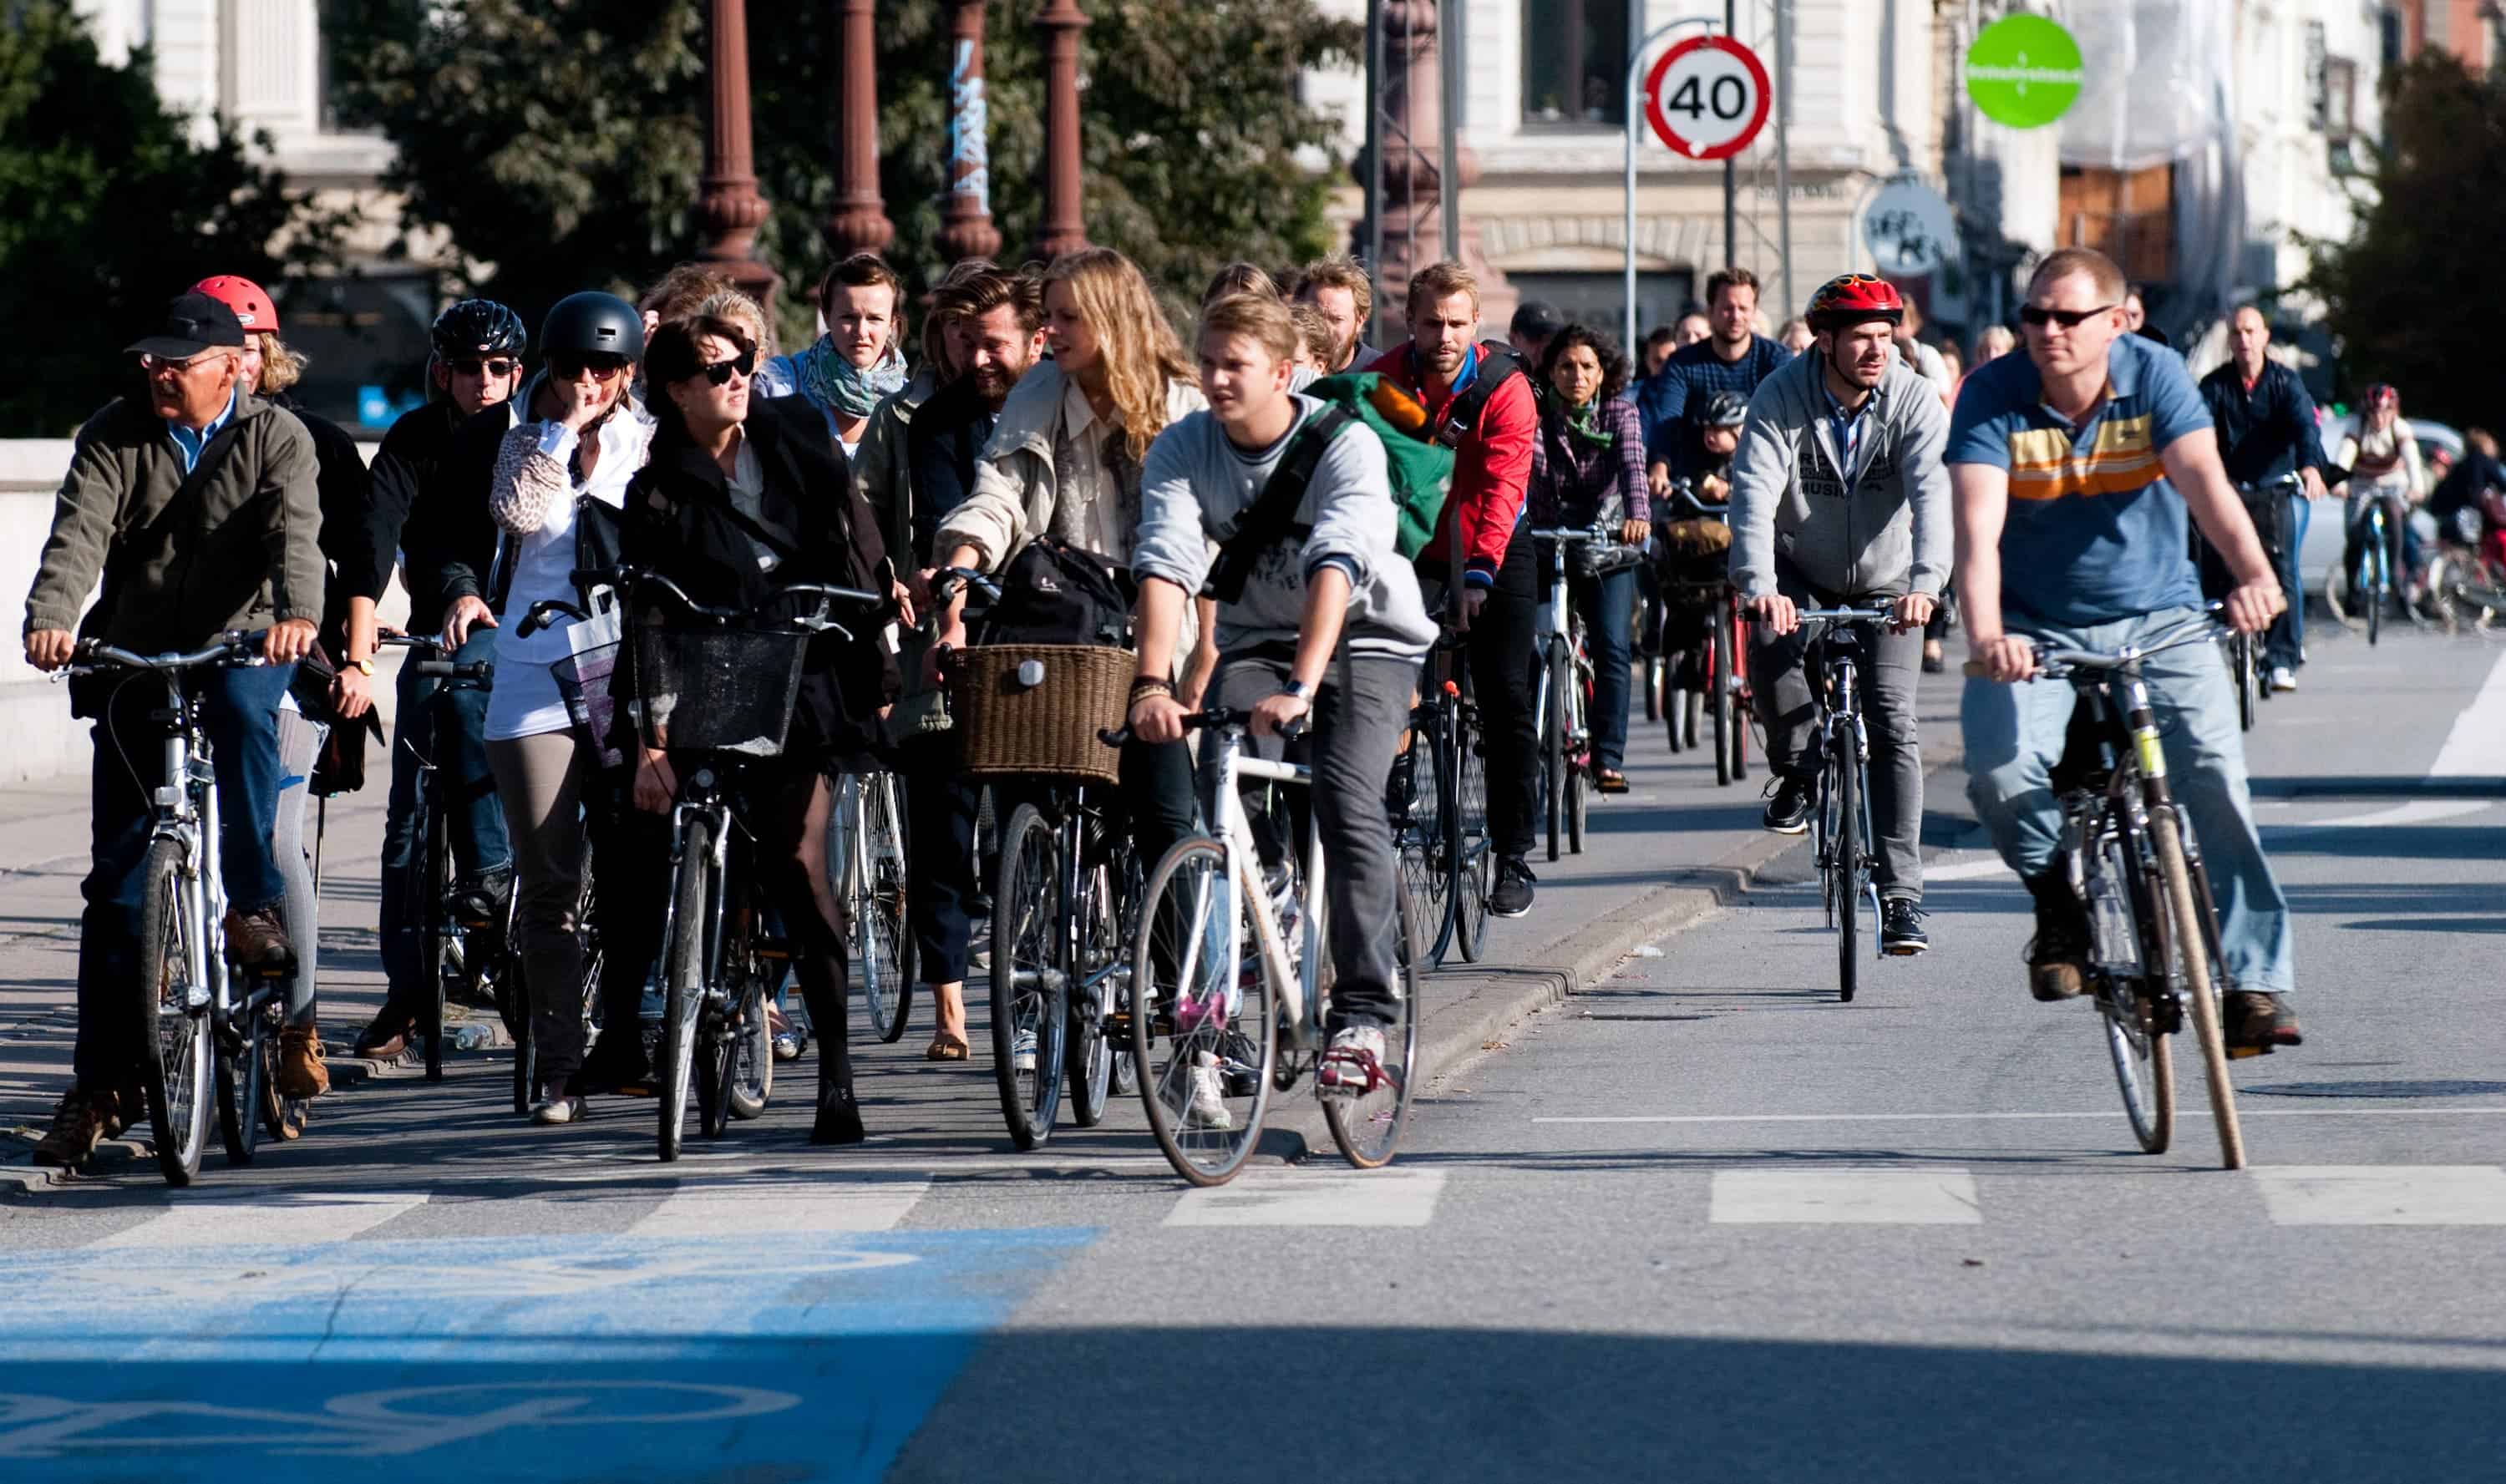 Cyclists in Copenhagen waiting for the green light. Credit: Wikimedia Commons